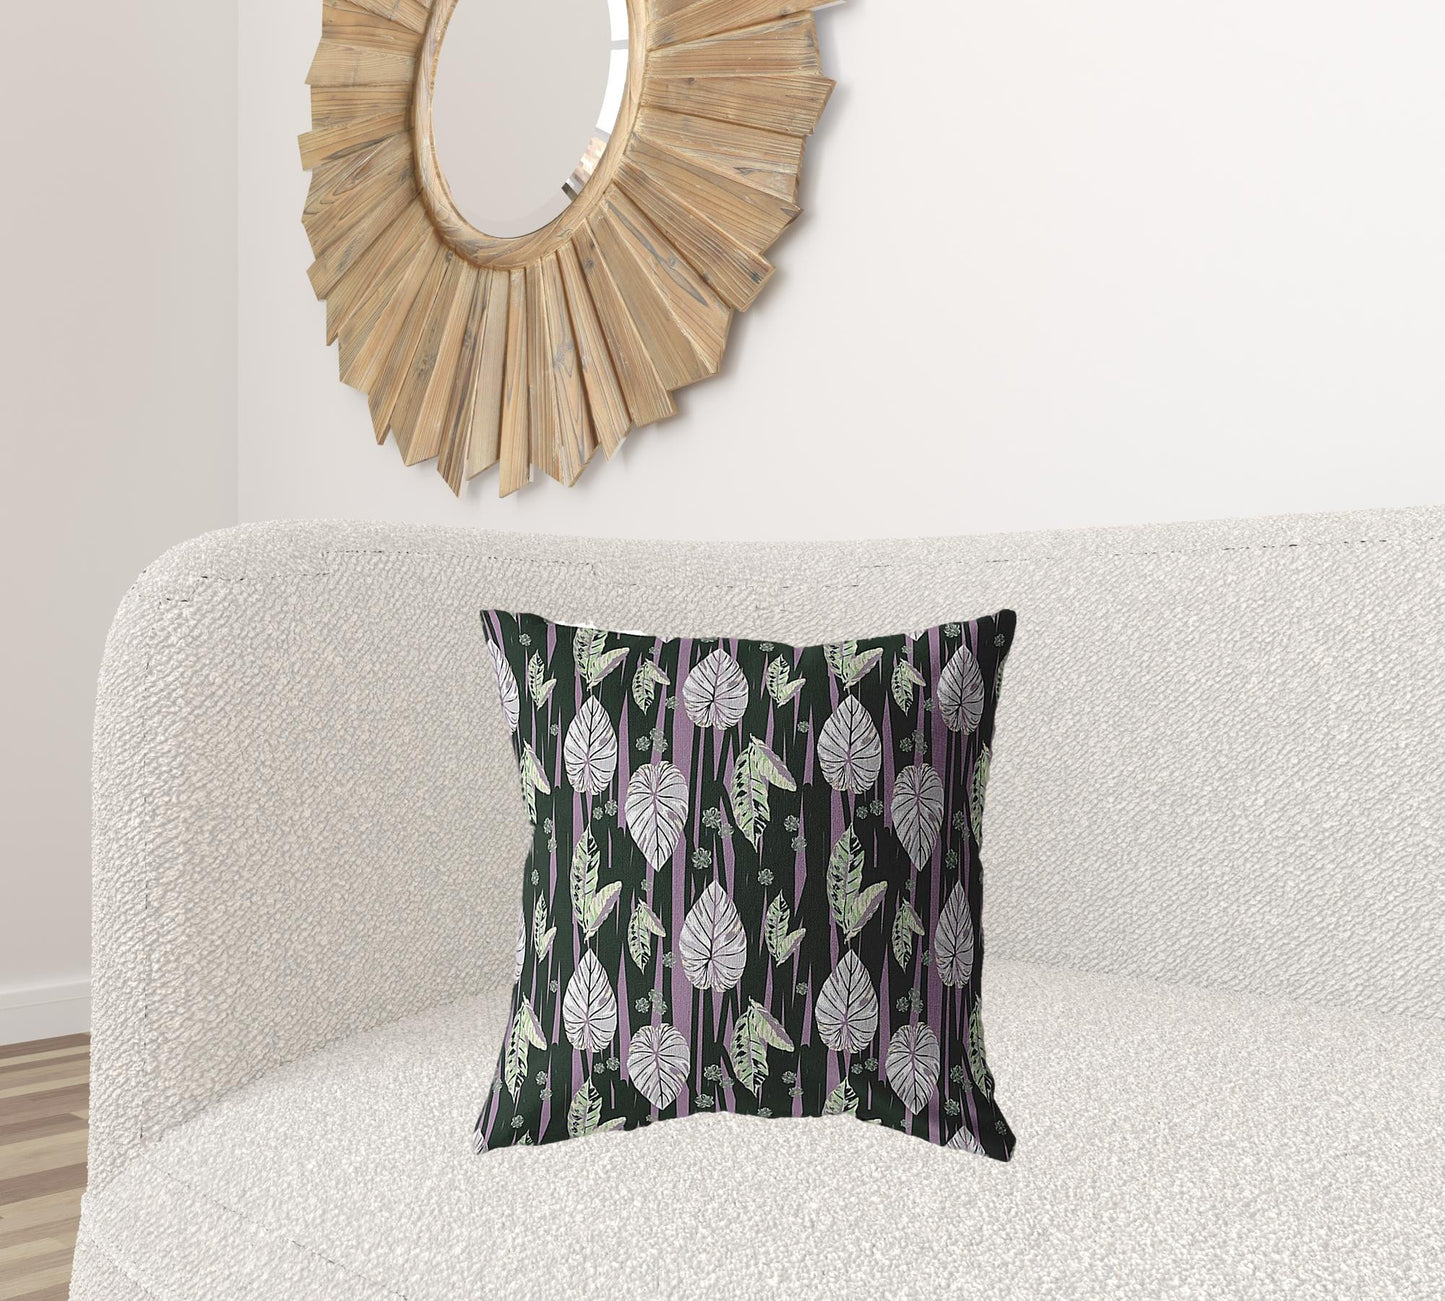 18” Black Purple Fall Leaves Suede Throw Pillow